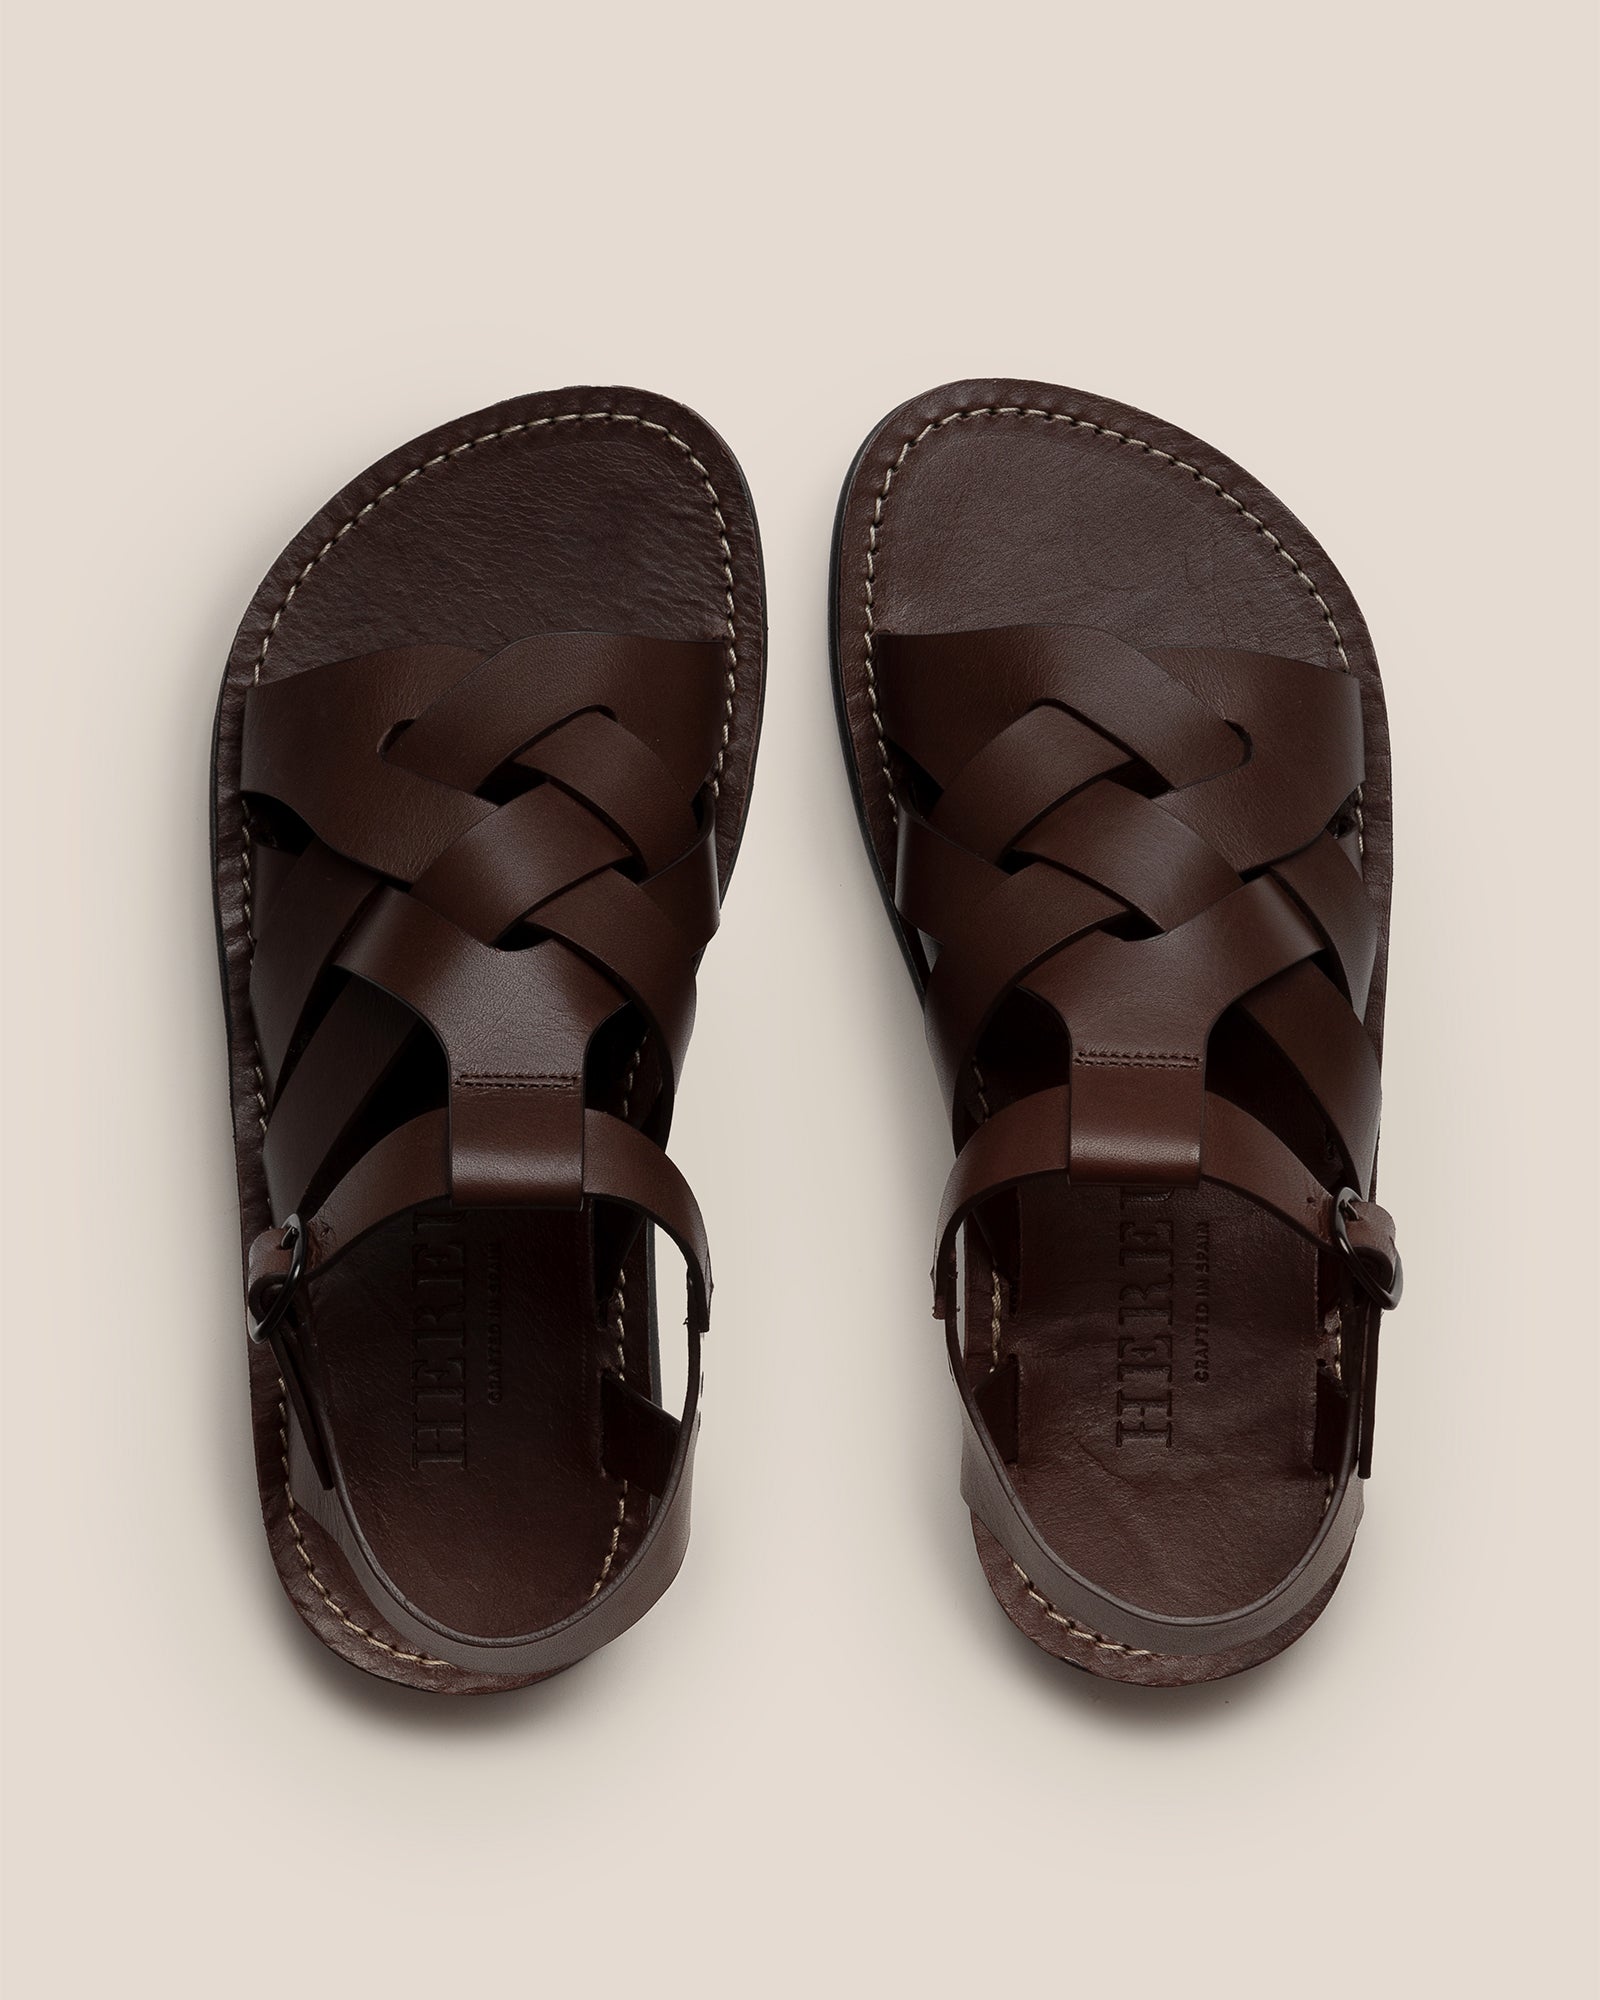 Jesus Sandals 'Centurion' Made in Holy Land - Leather